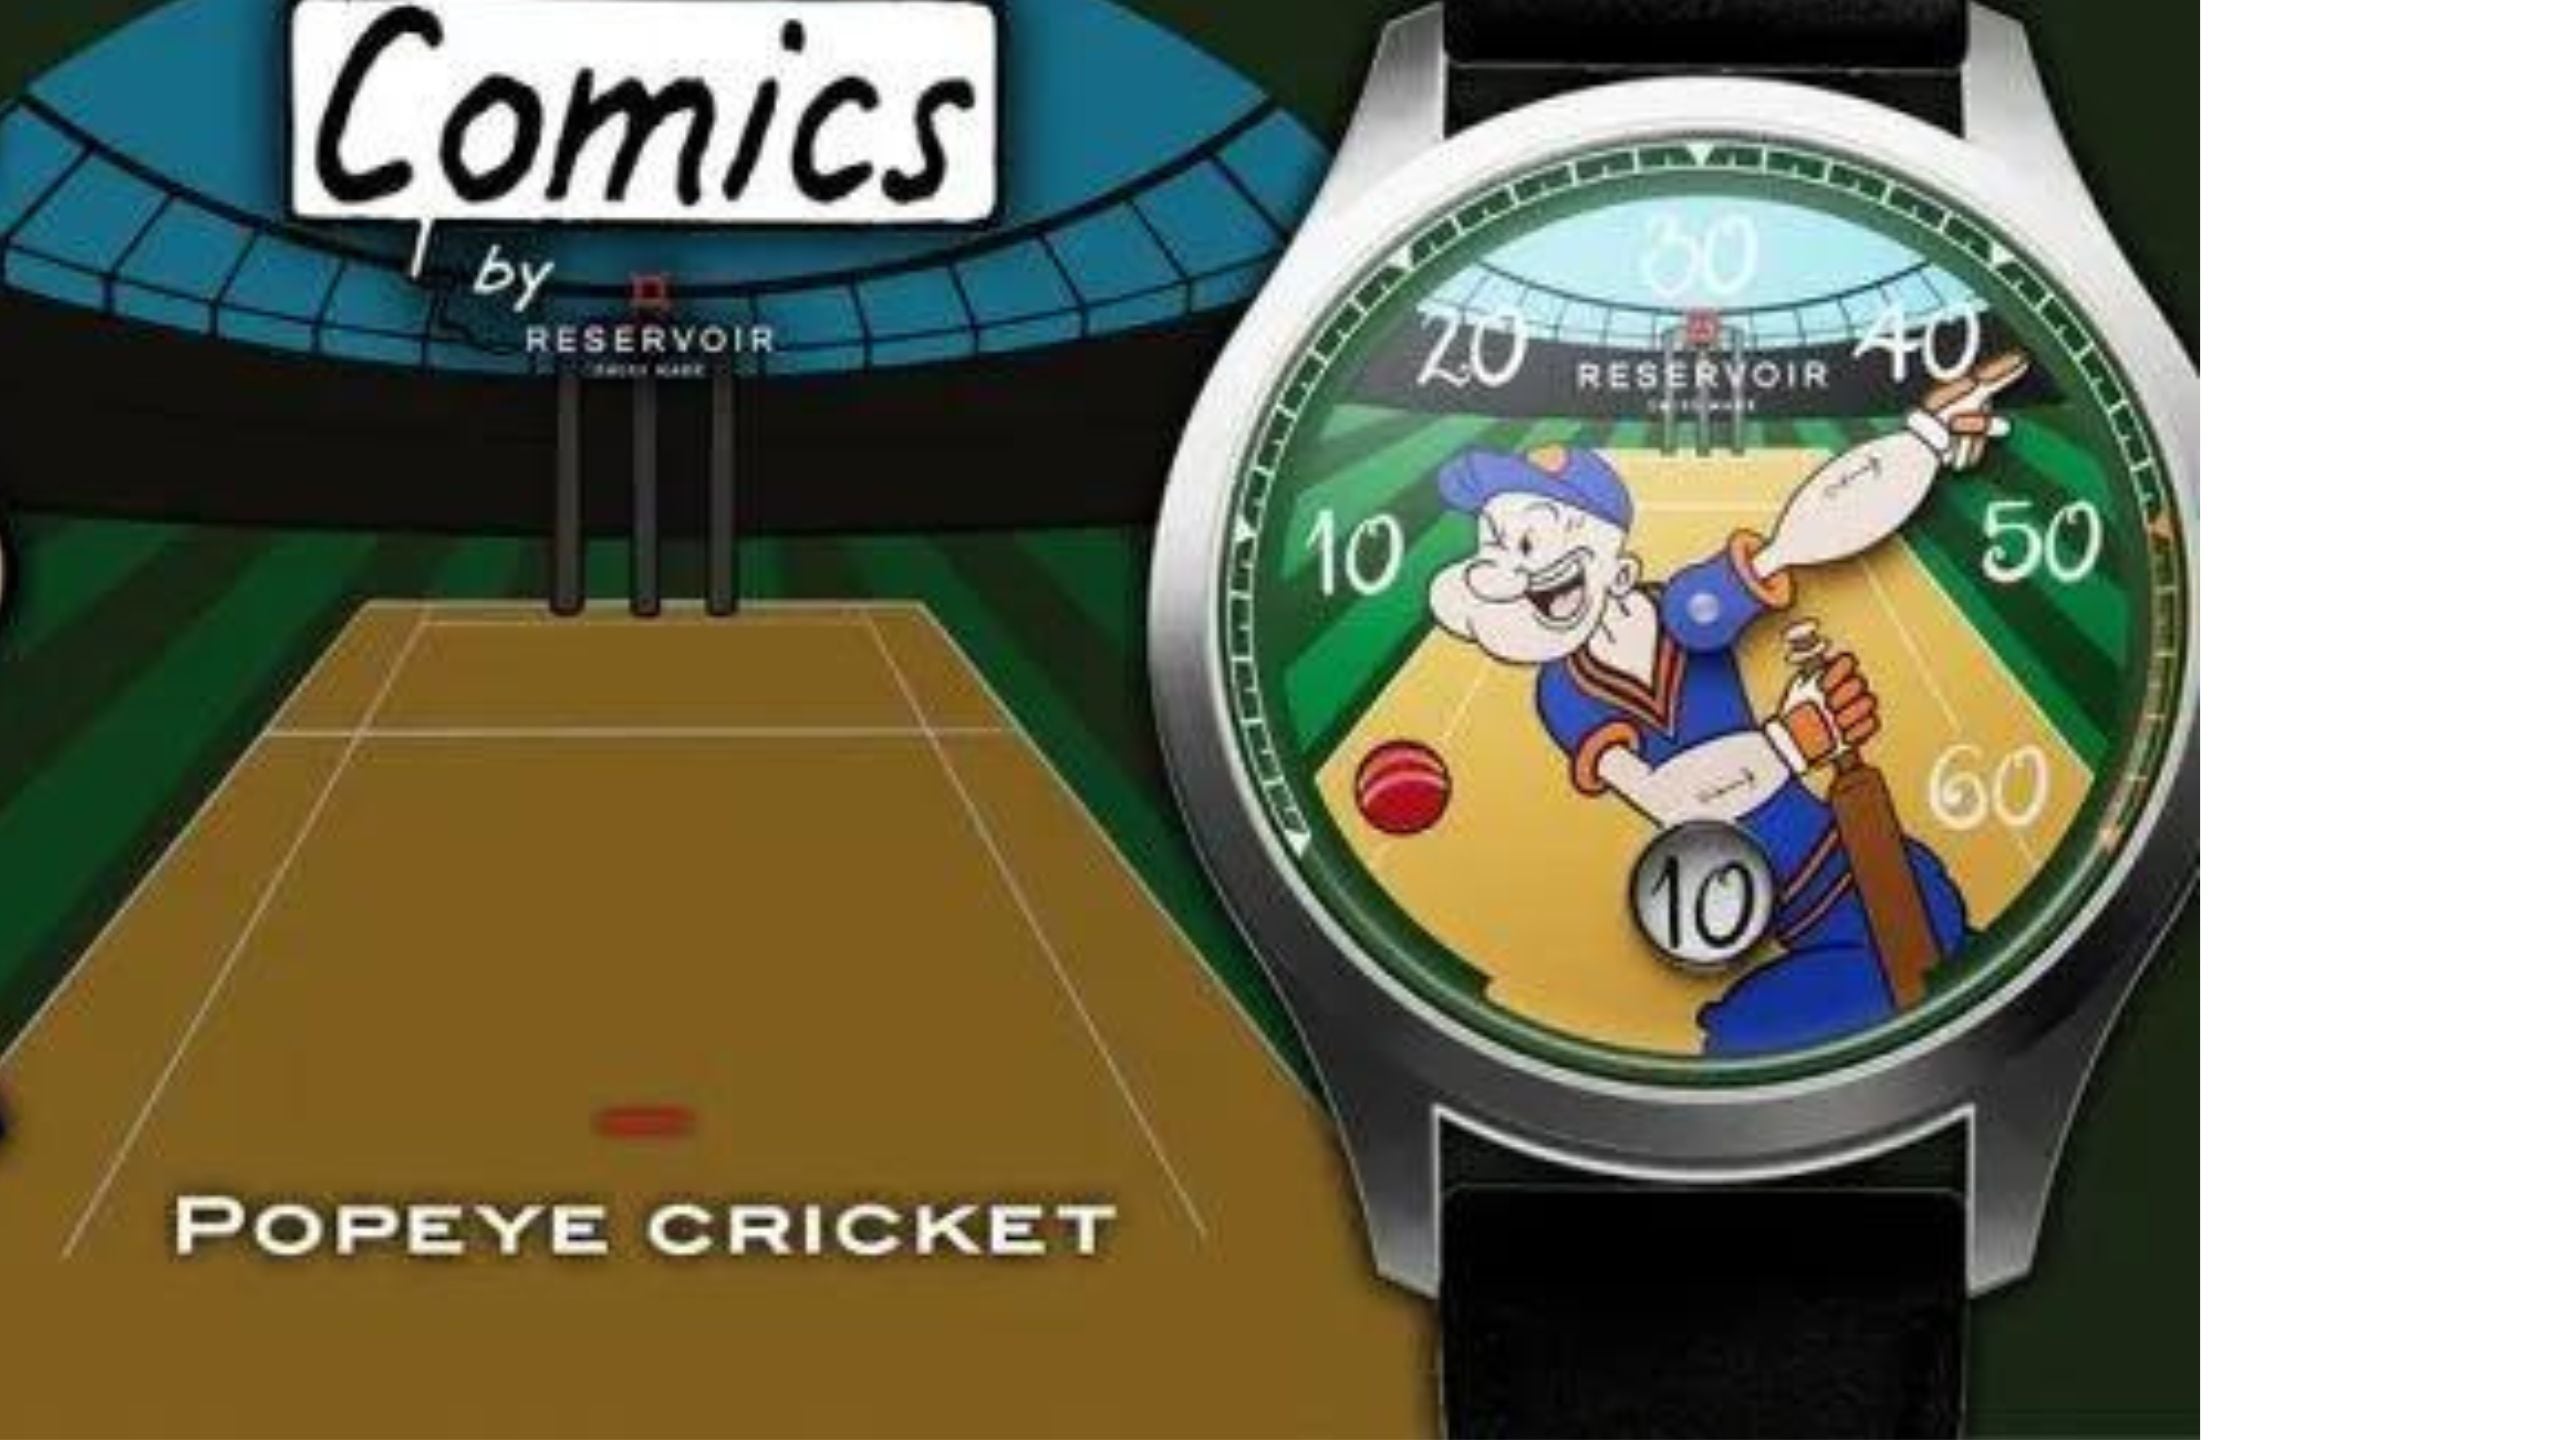 The Reservoir X Popeye Cricket - Limited Edition